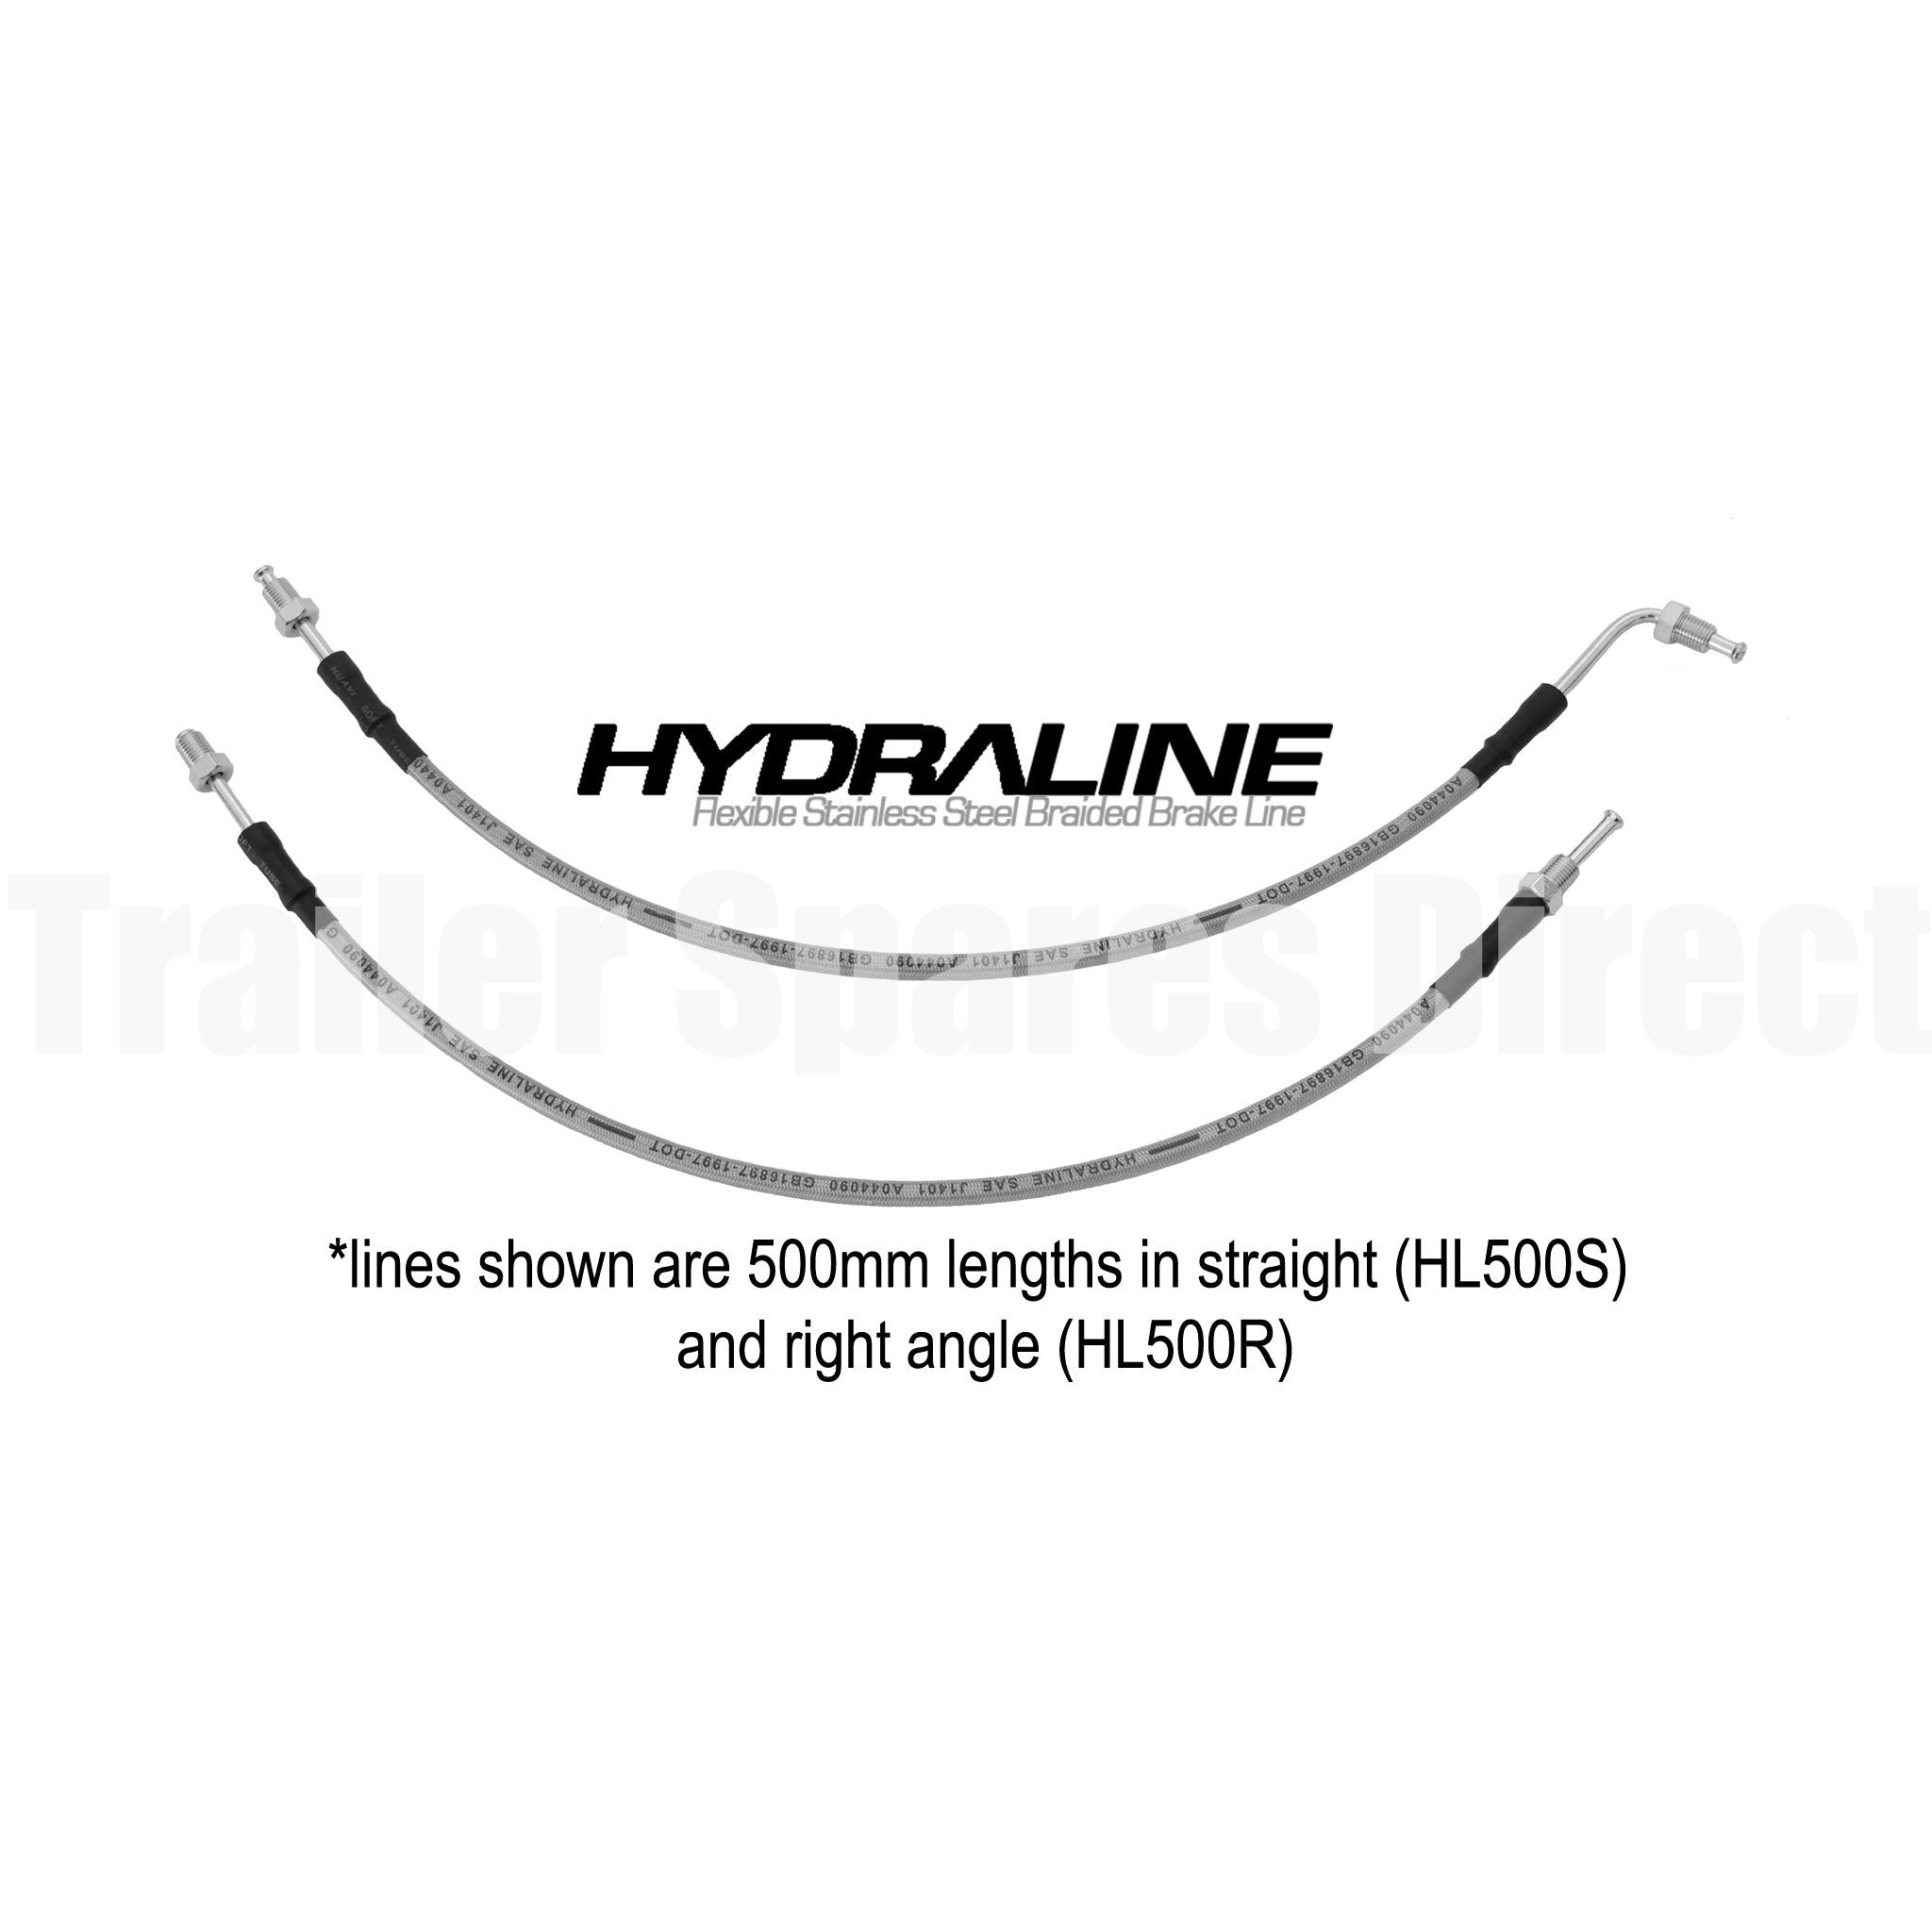 Tandem axle HydraLine kit with 5500mm lead line